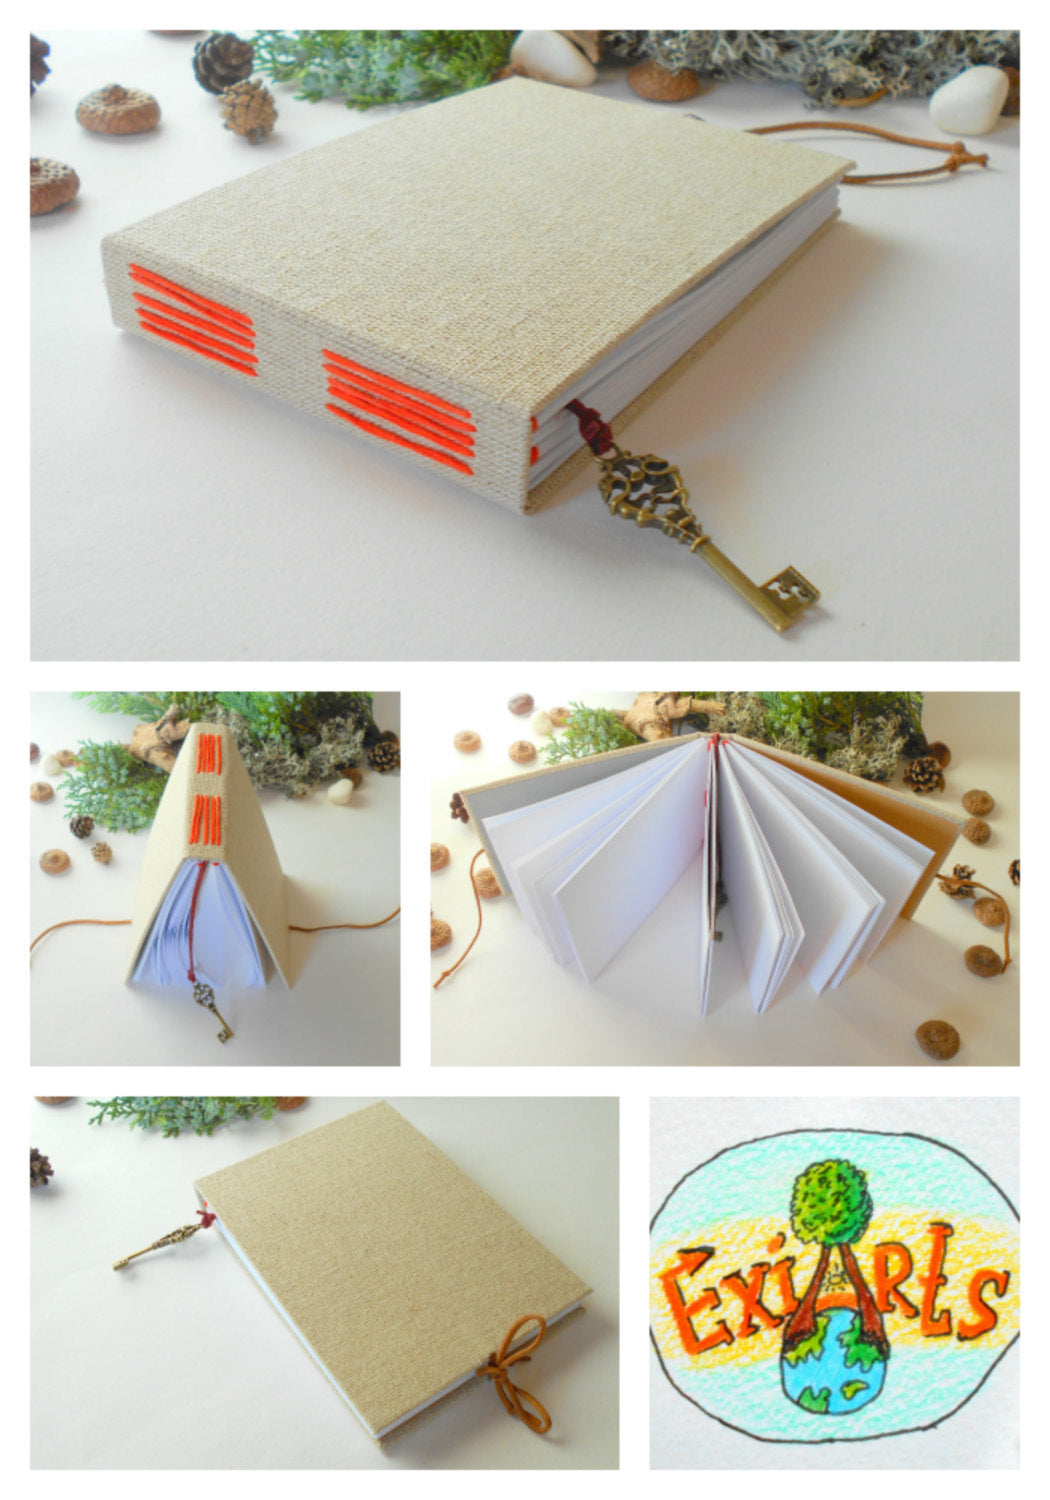 Handmade travel sketchbook journal with fabric hardcovers covers, skeleton key bookmark- eco-friendly blank book with linen fabric wrapping and 100% recycled page sheets